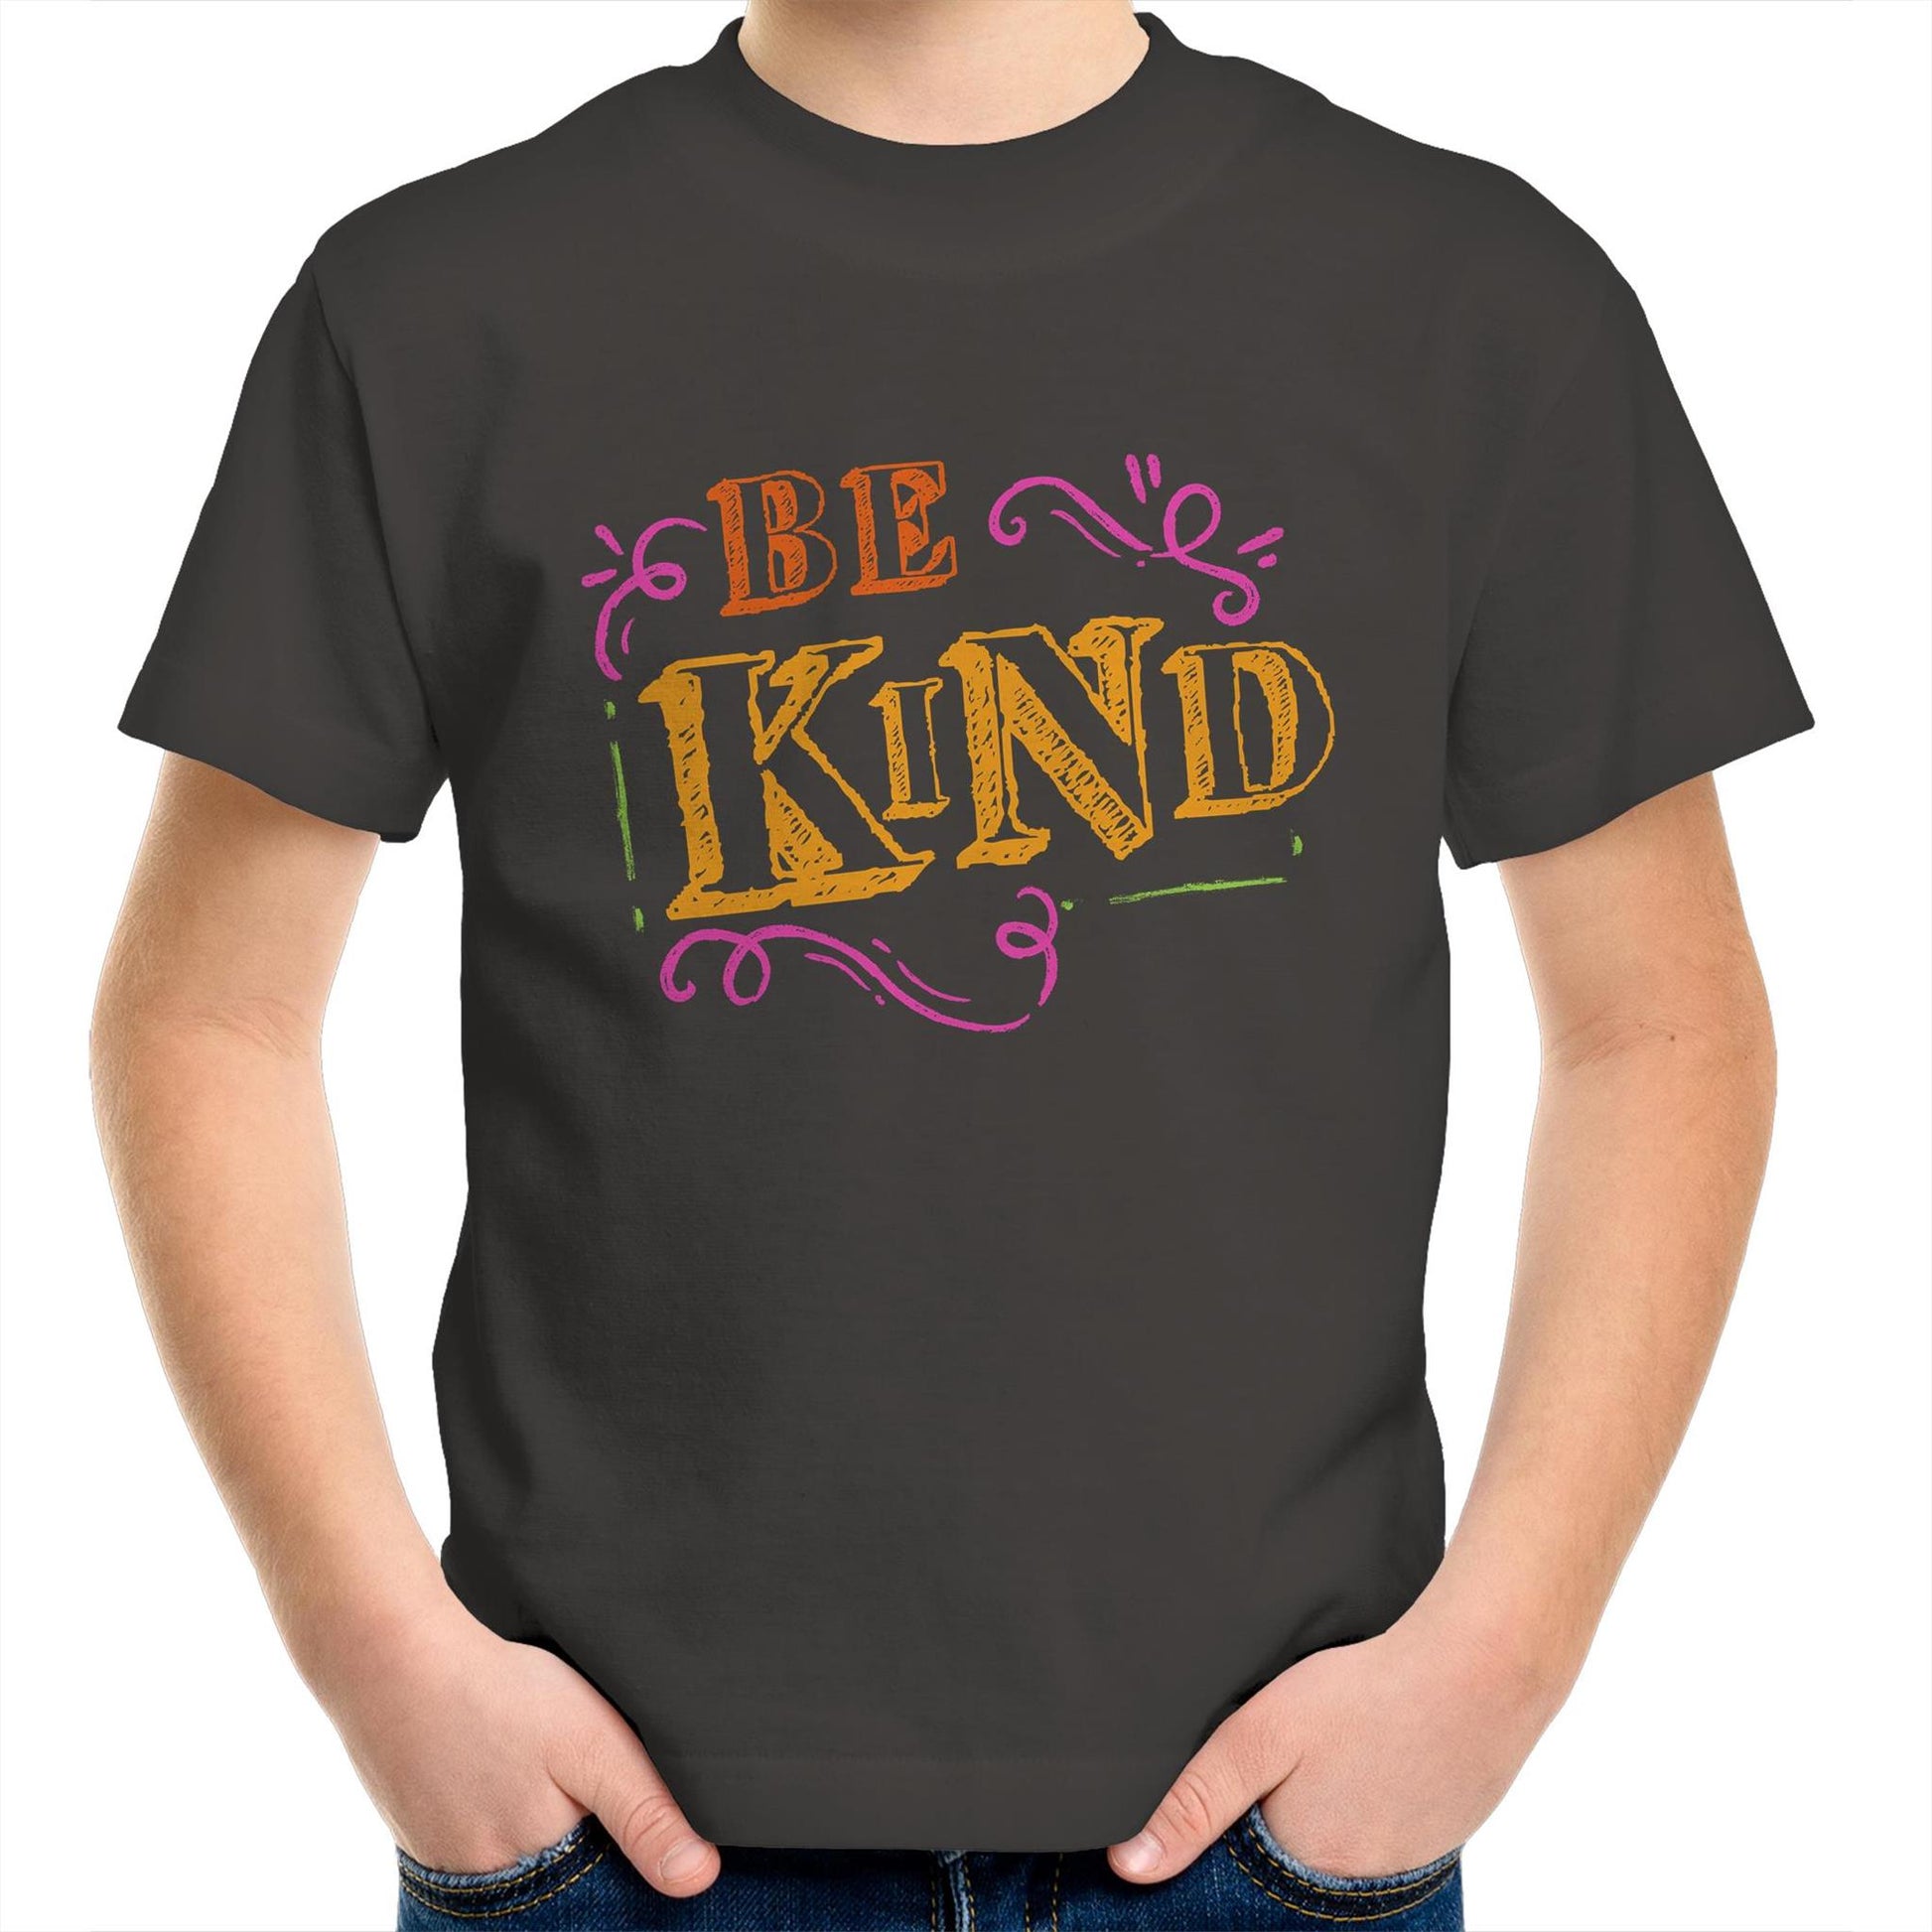 Be Kind - Kids Youth Crew T-Shirt Charcoal Kids Youth T-shirt